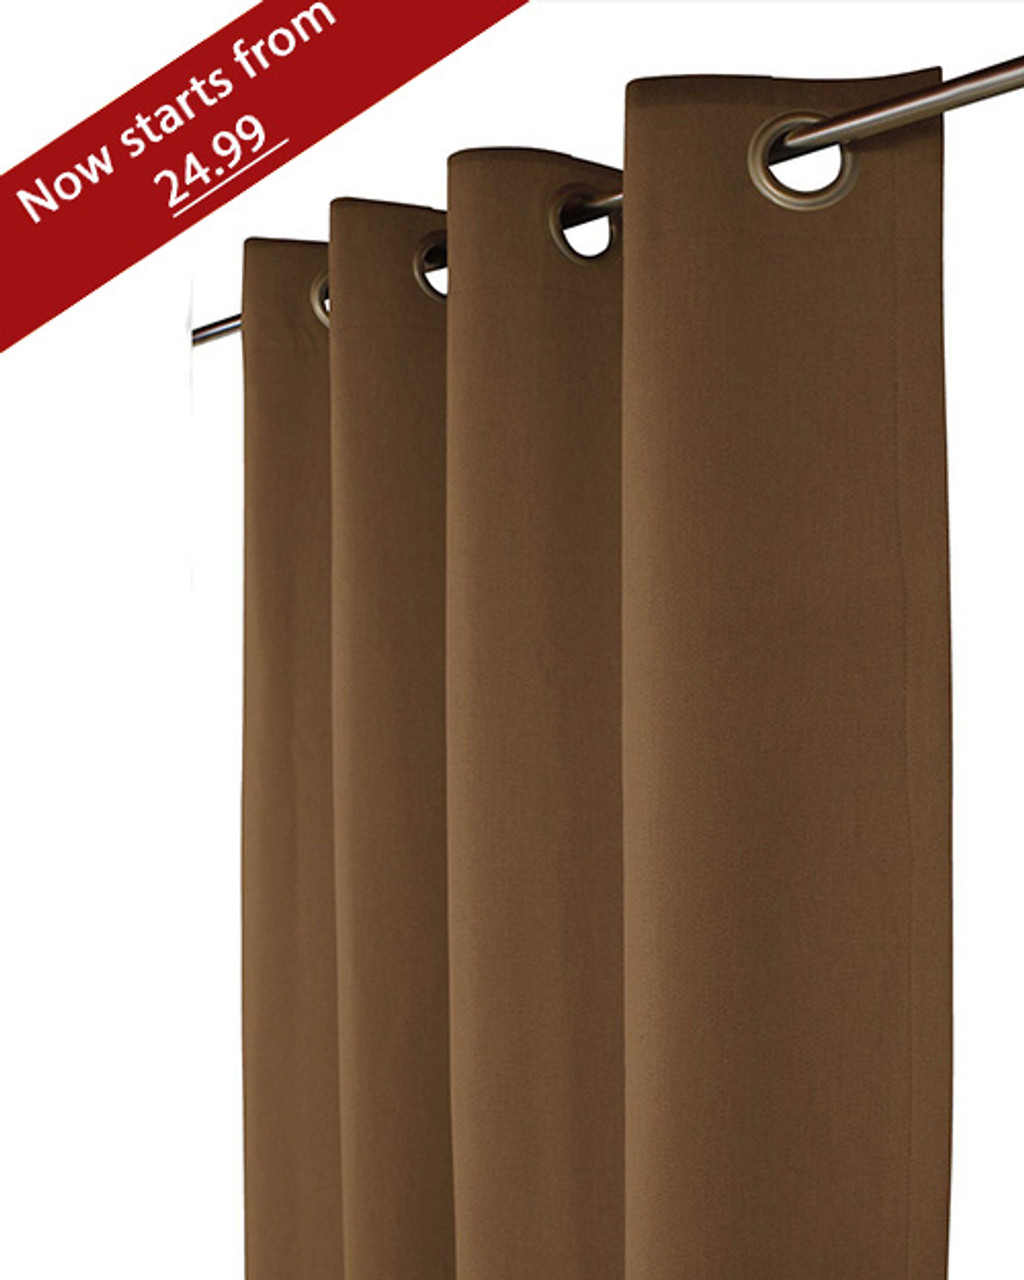 Light out curtain Grommet Top plain Design-Coffee-Polyester- 56x96 inches-6